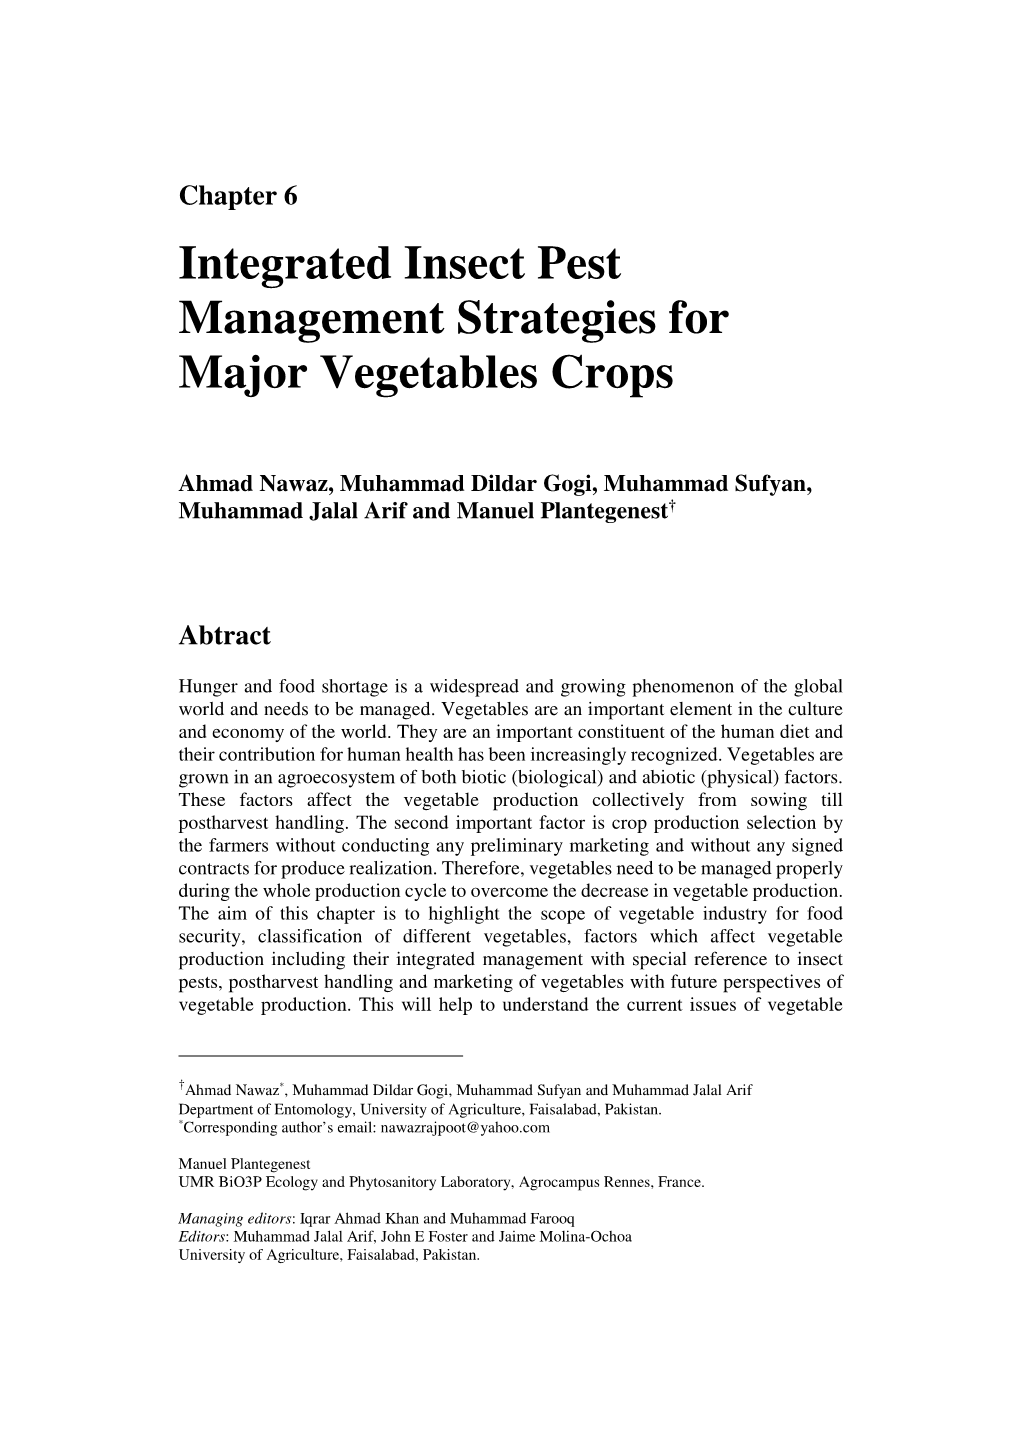 Integrated Insect Pest Management Strategies for Major Vegetables Crops